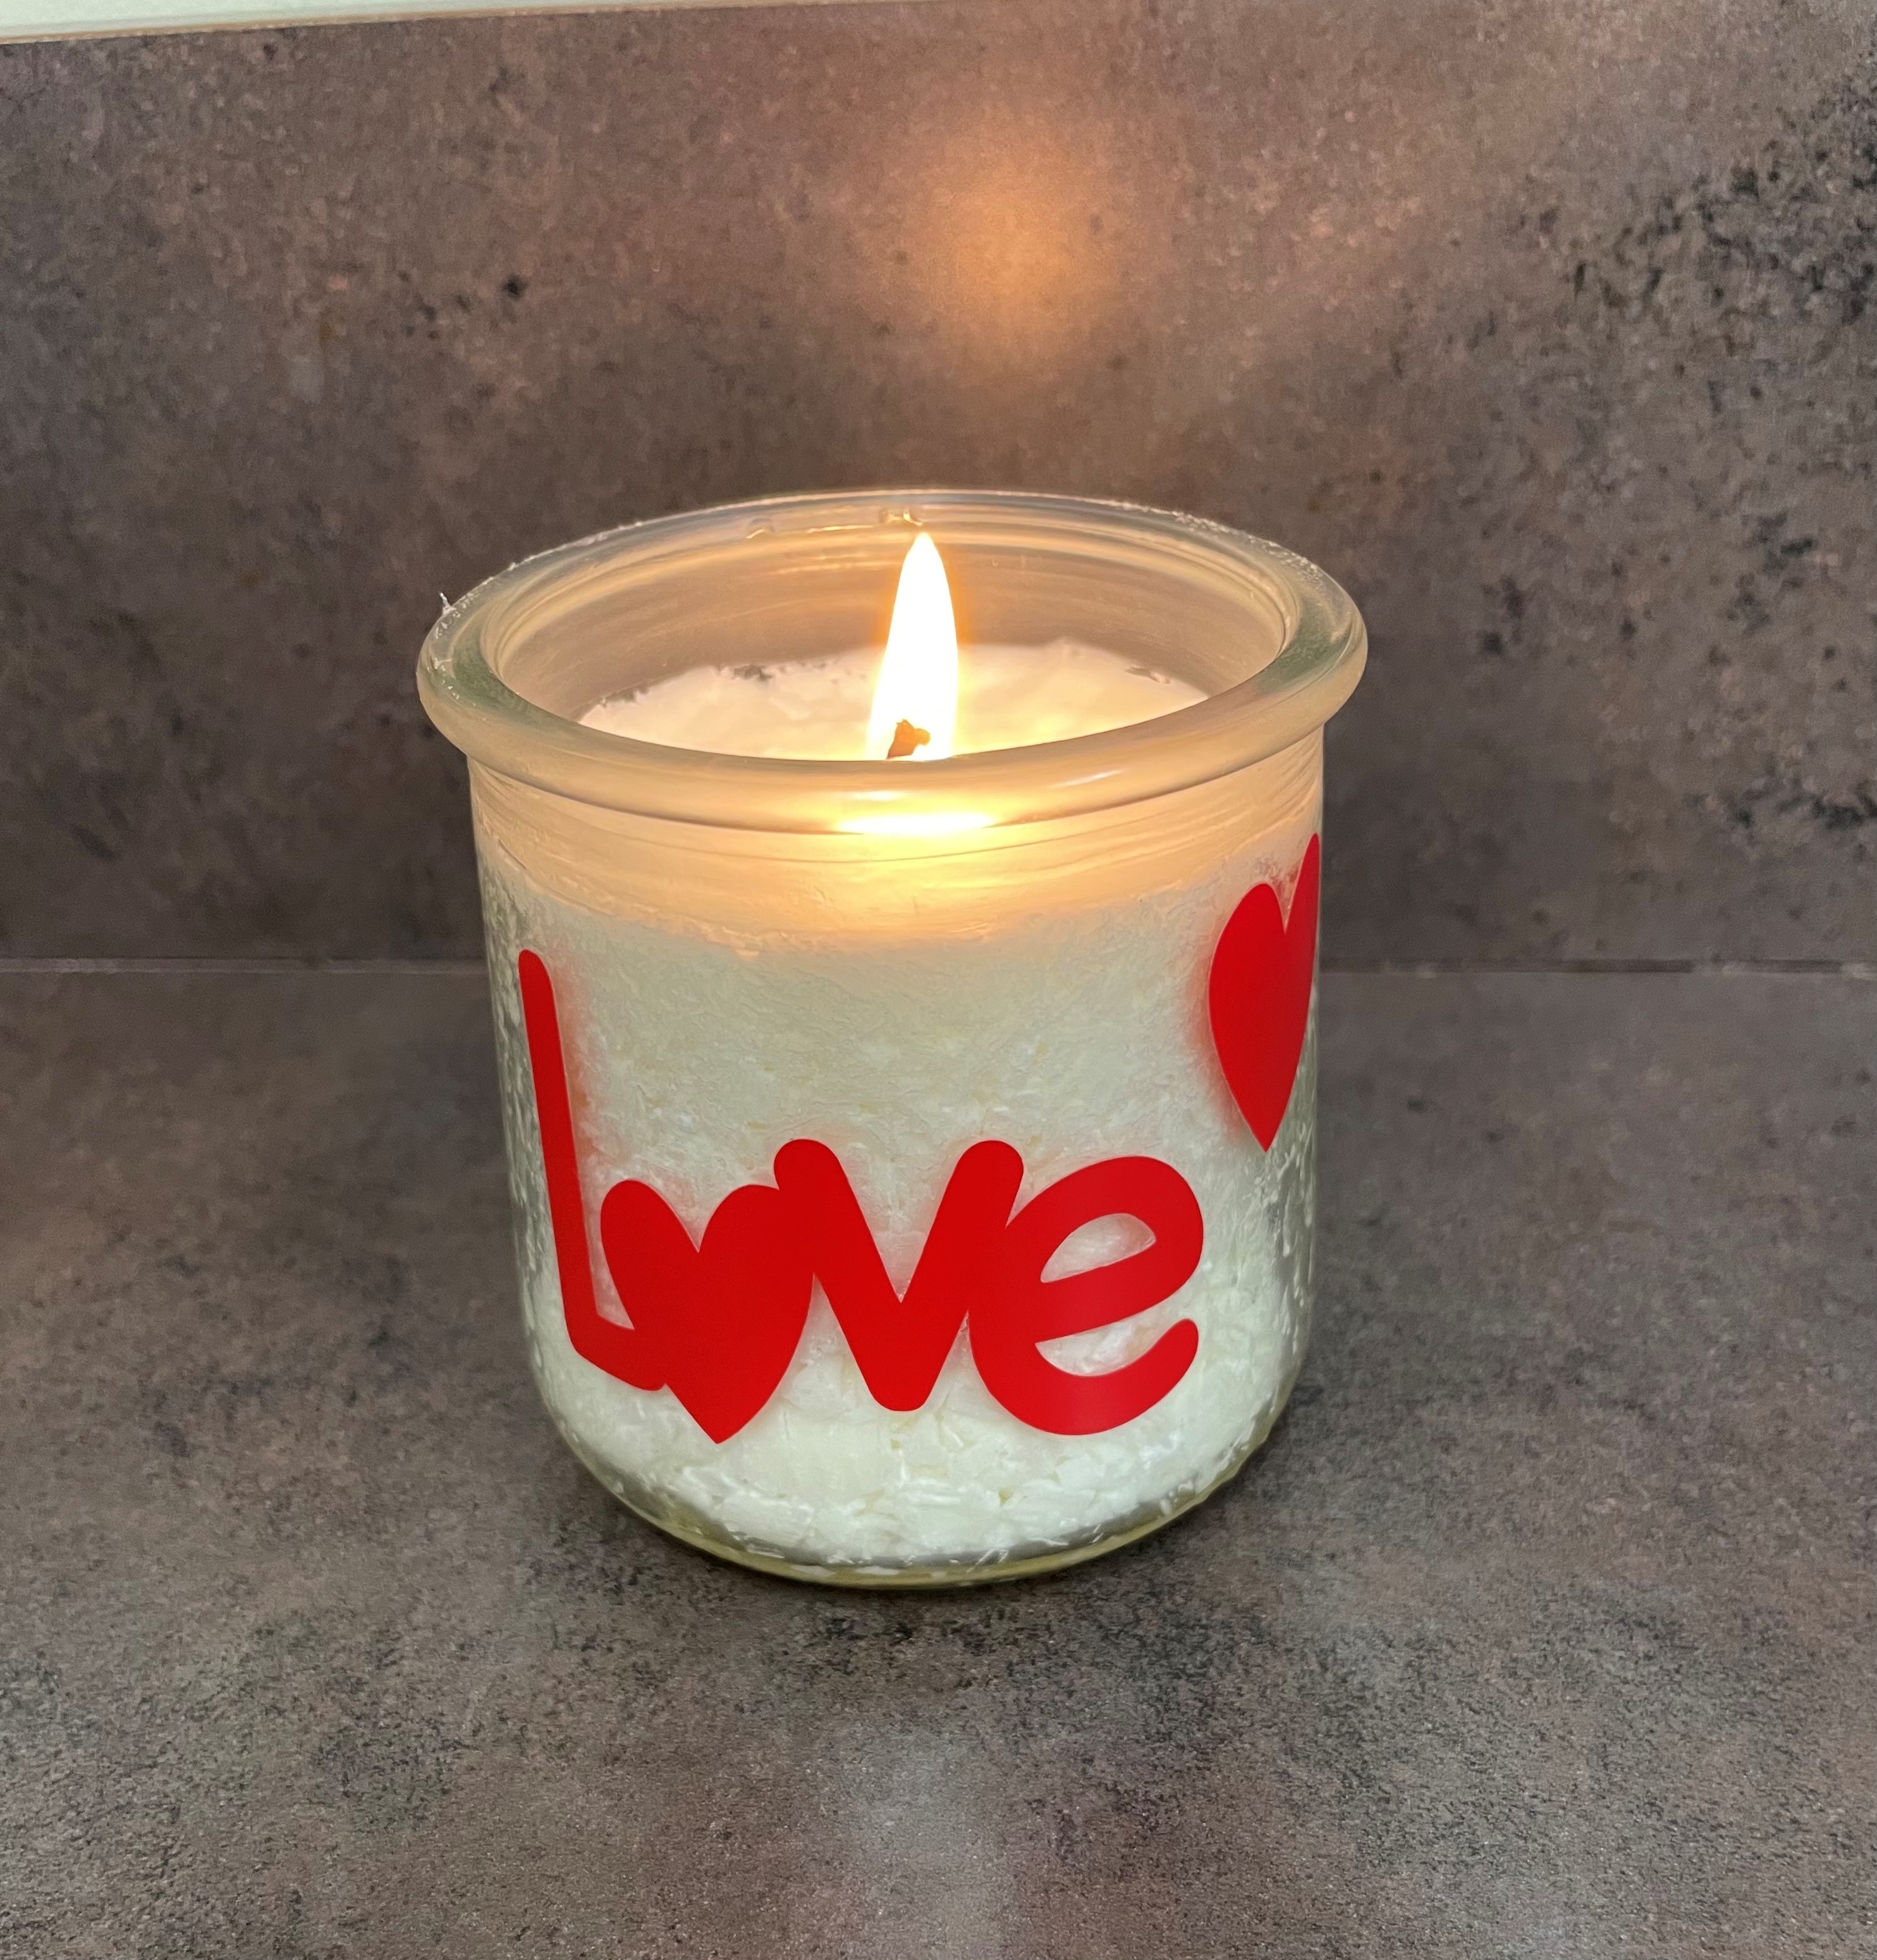 White candle "love" written in red 